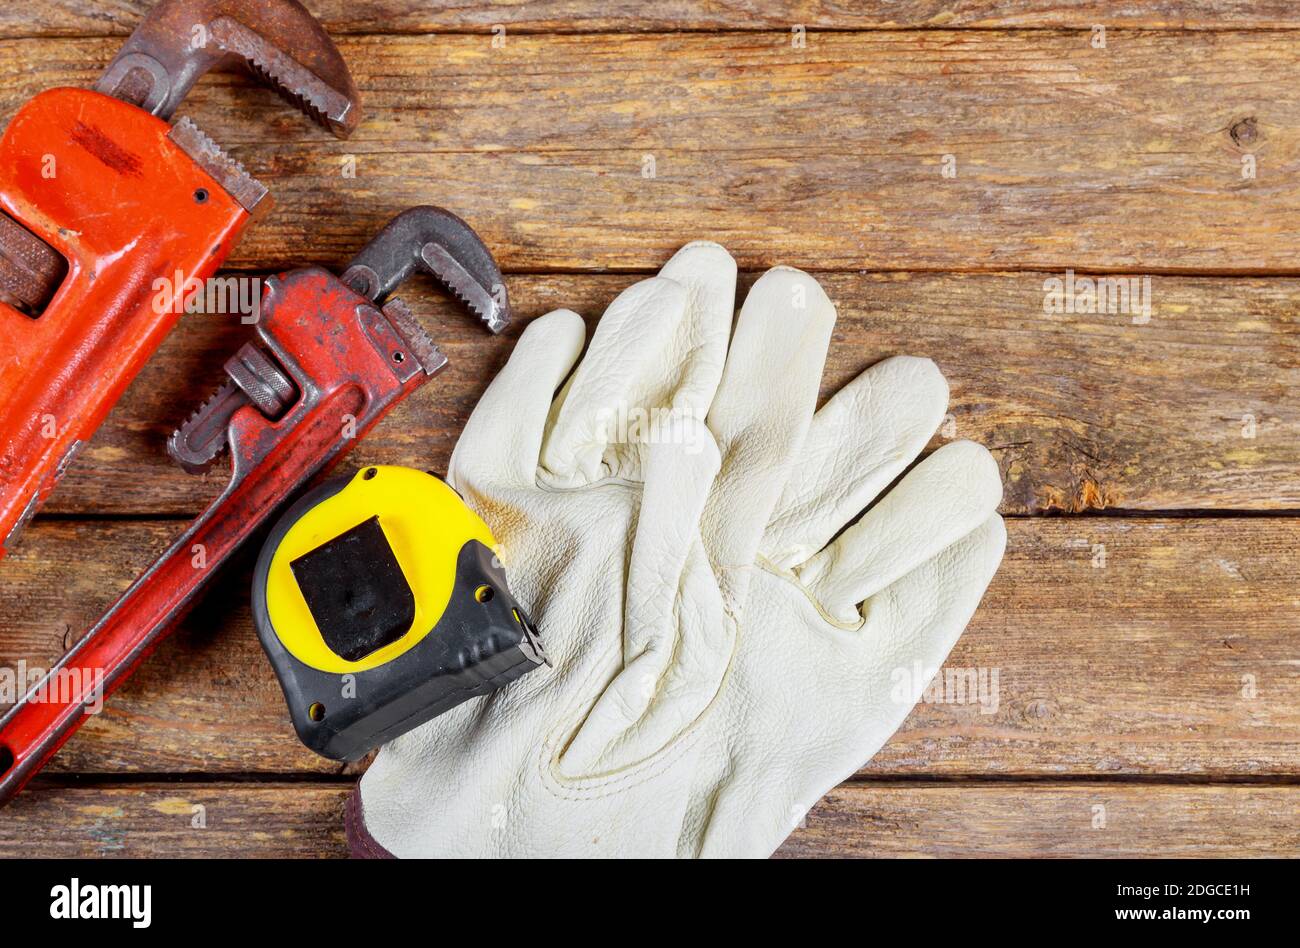 Wrench plumbing leather safety gloves construction concept. Stock Photo